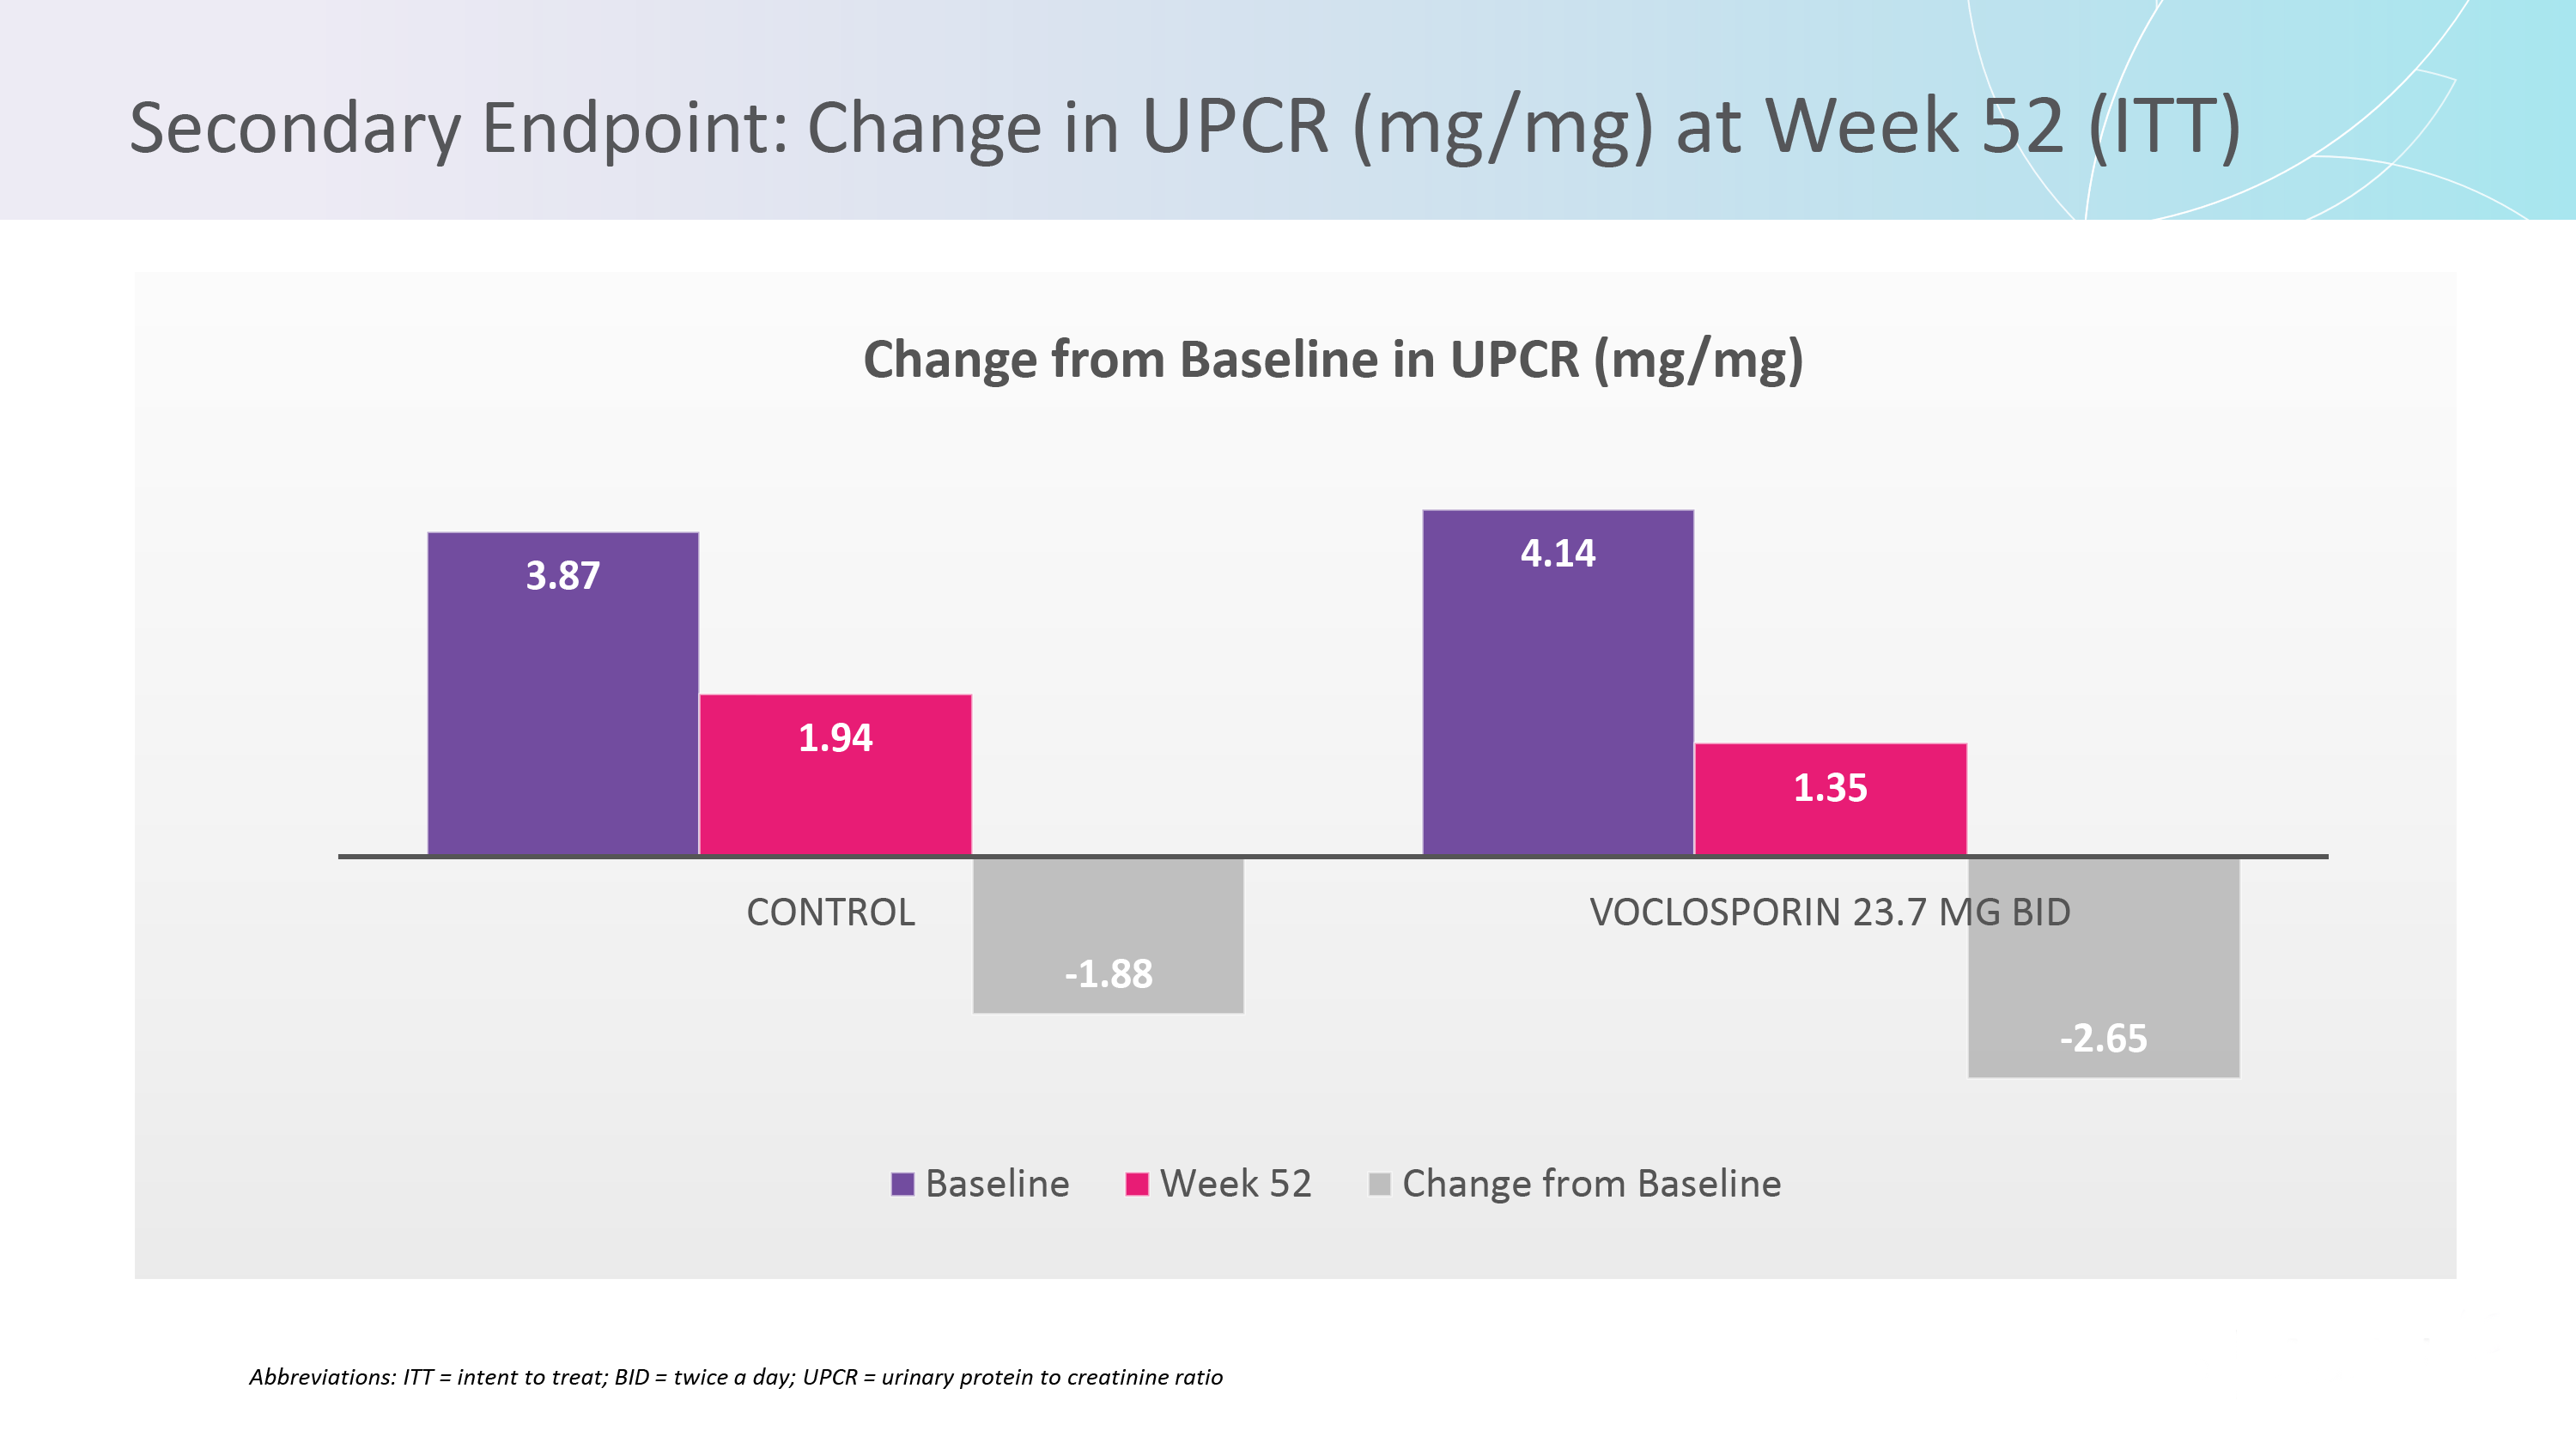 AURORA Phase 3 clinical trial secondary endpoint change in UPCR at Week 52